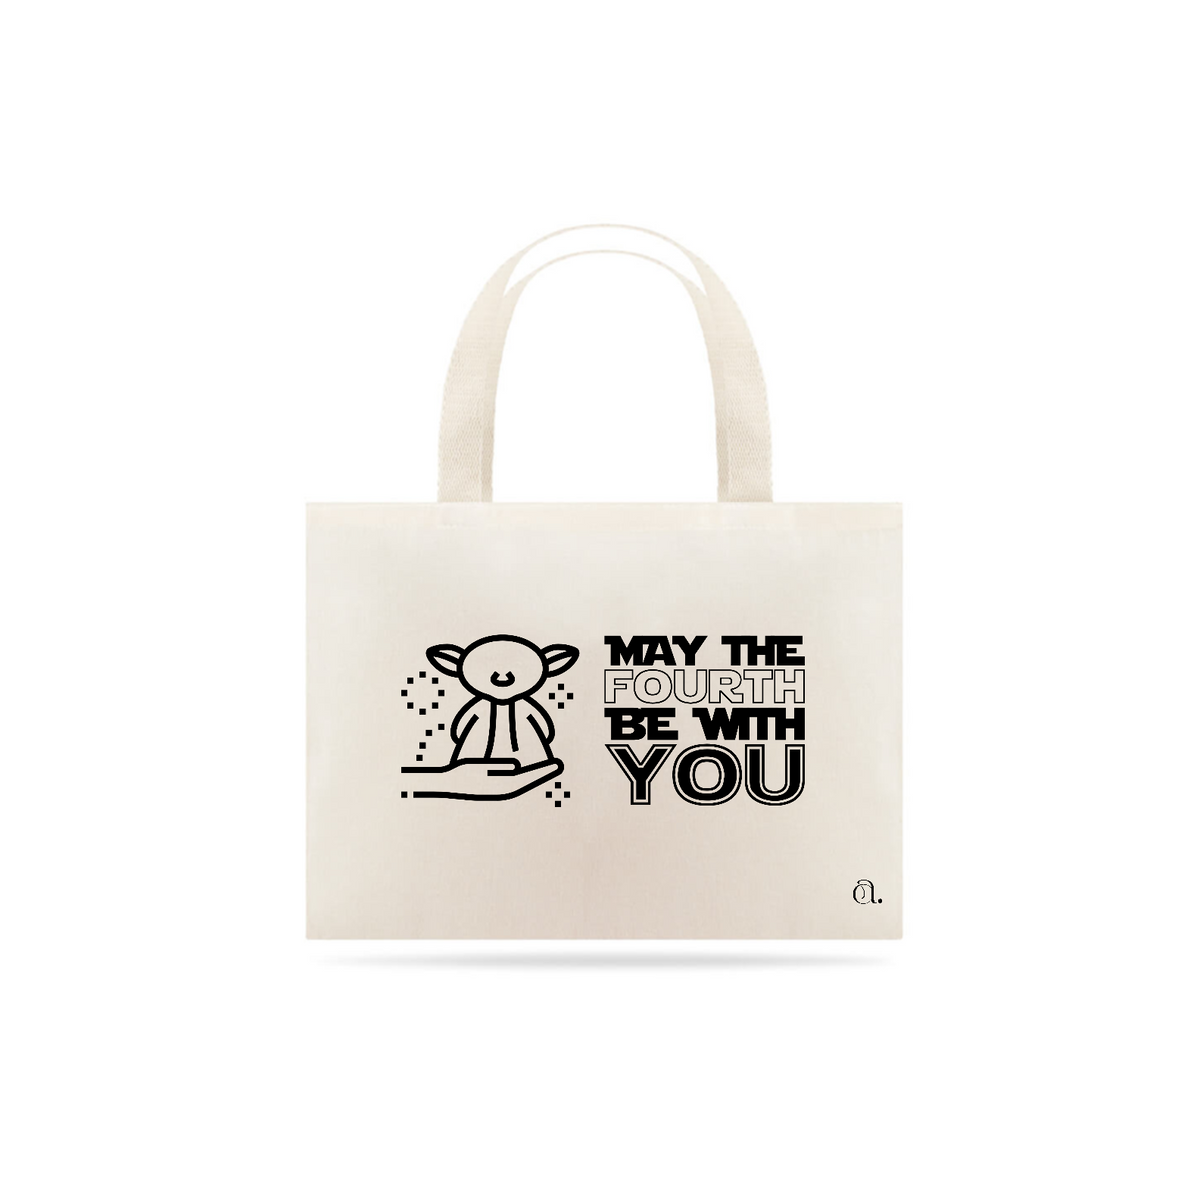 Nome do produto: Ecobag May The Fourth Be With You